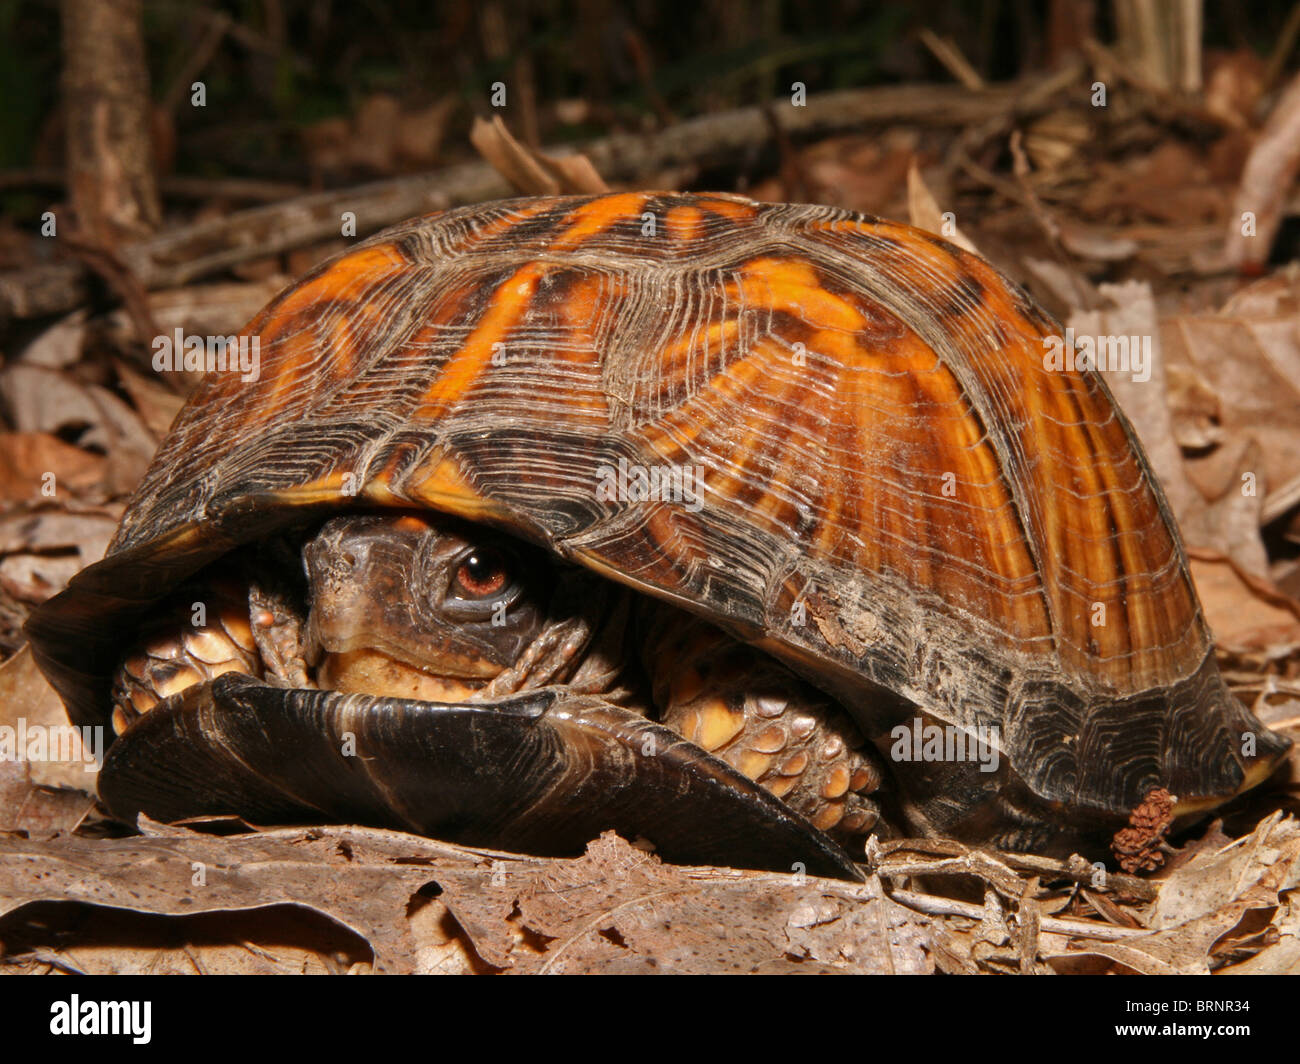 Eastern Box Turtle (Terrapene c. carolina) Coming Out of its Shell in Illinois Stock Photo